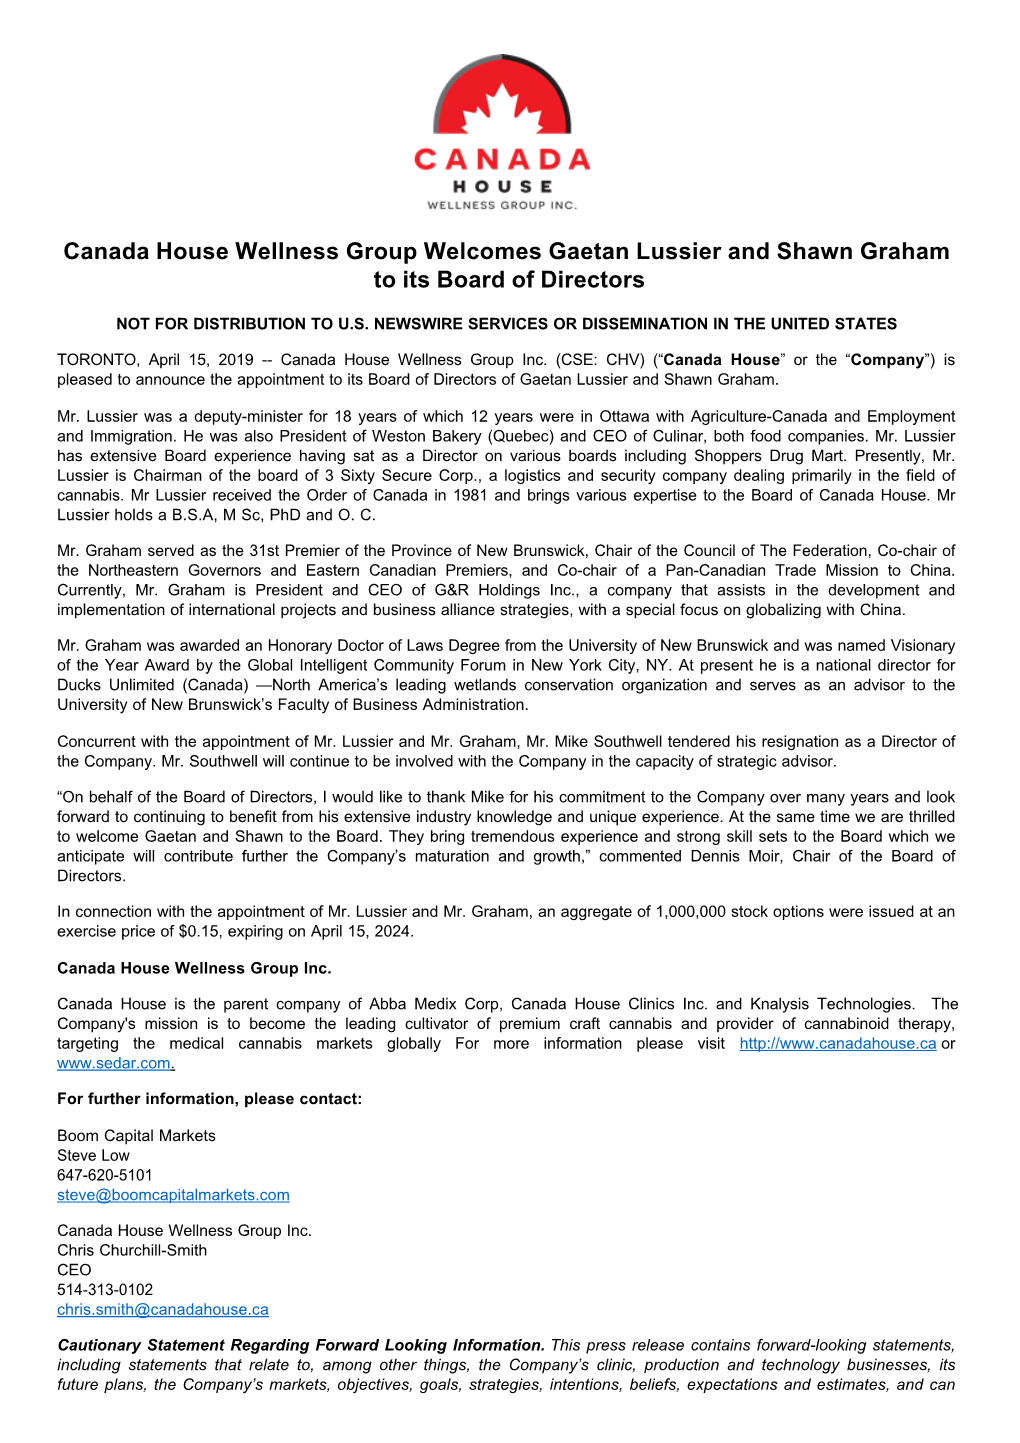 Canada House Wellness Group Welcomes Gaetan Lussier and Shawn Graham to Its Board of Directors